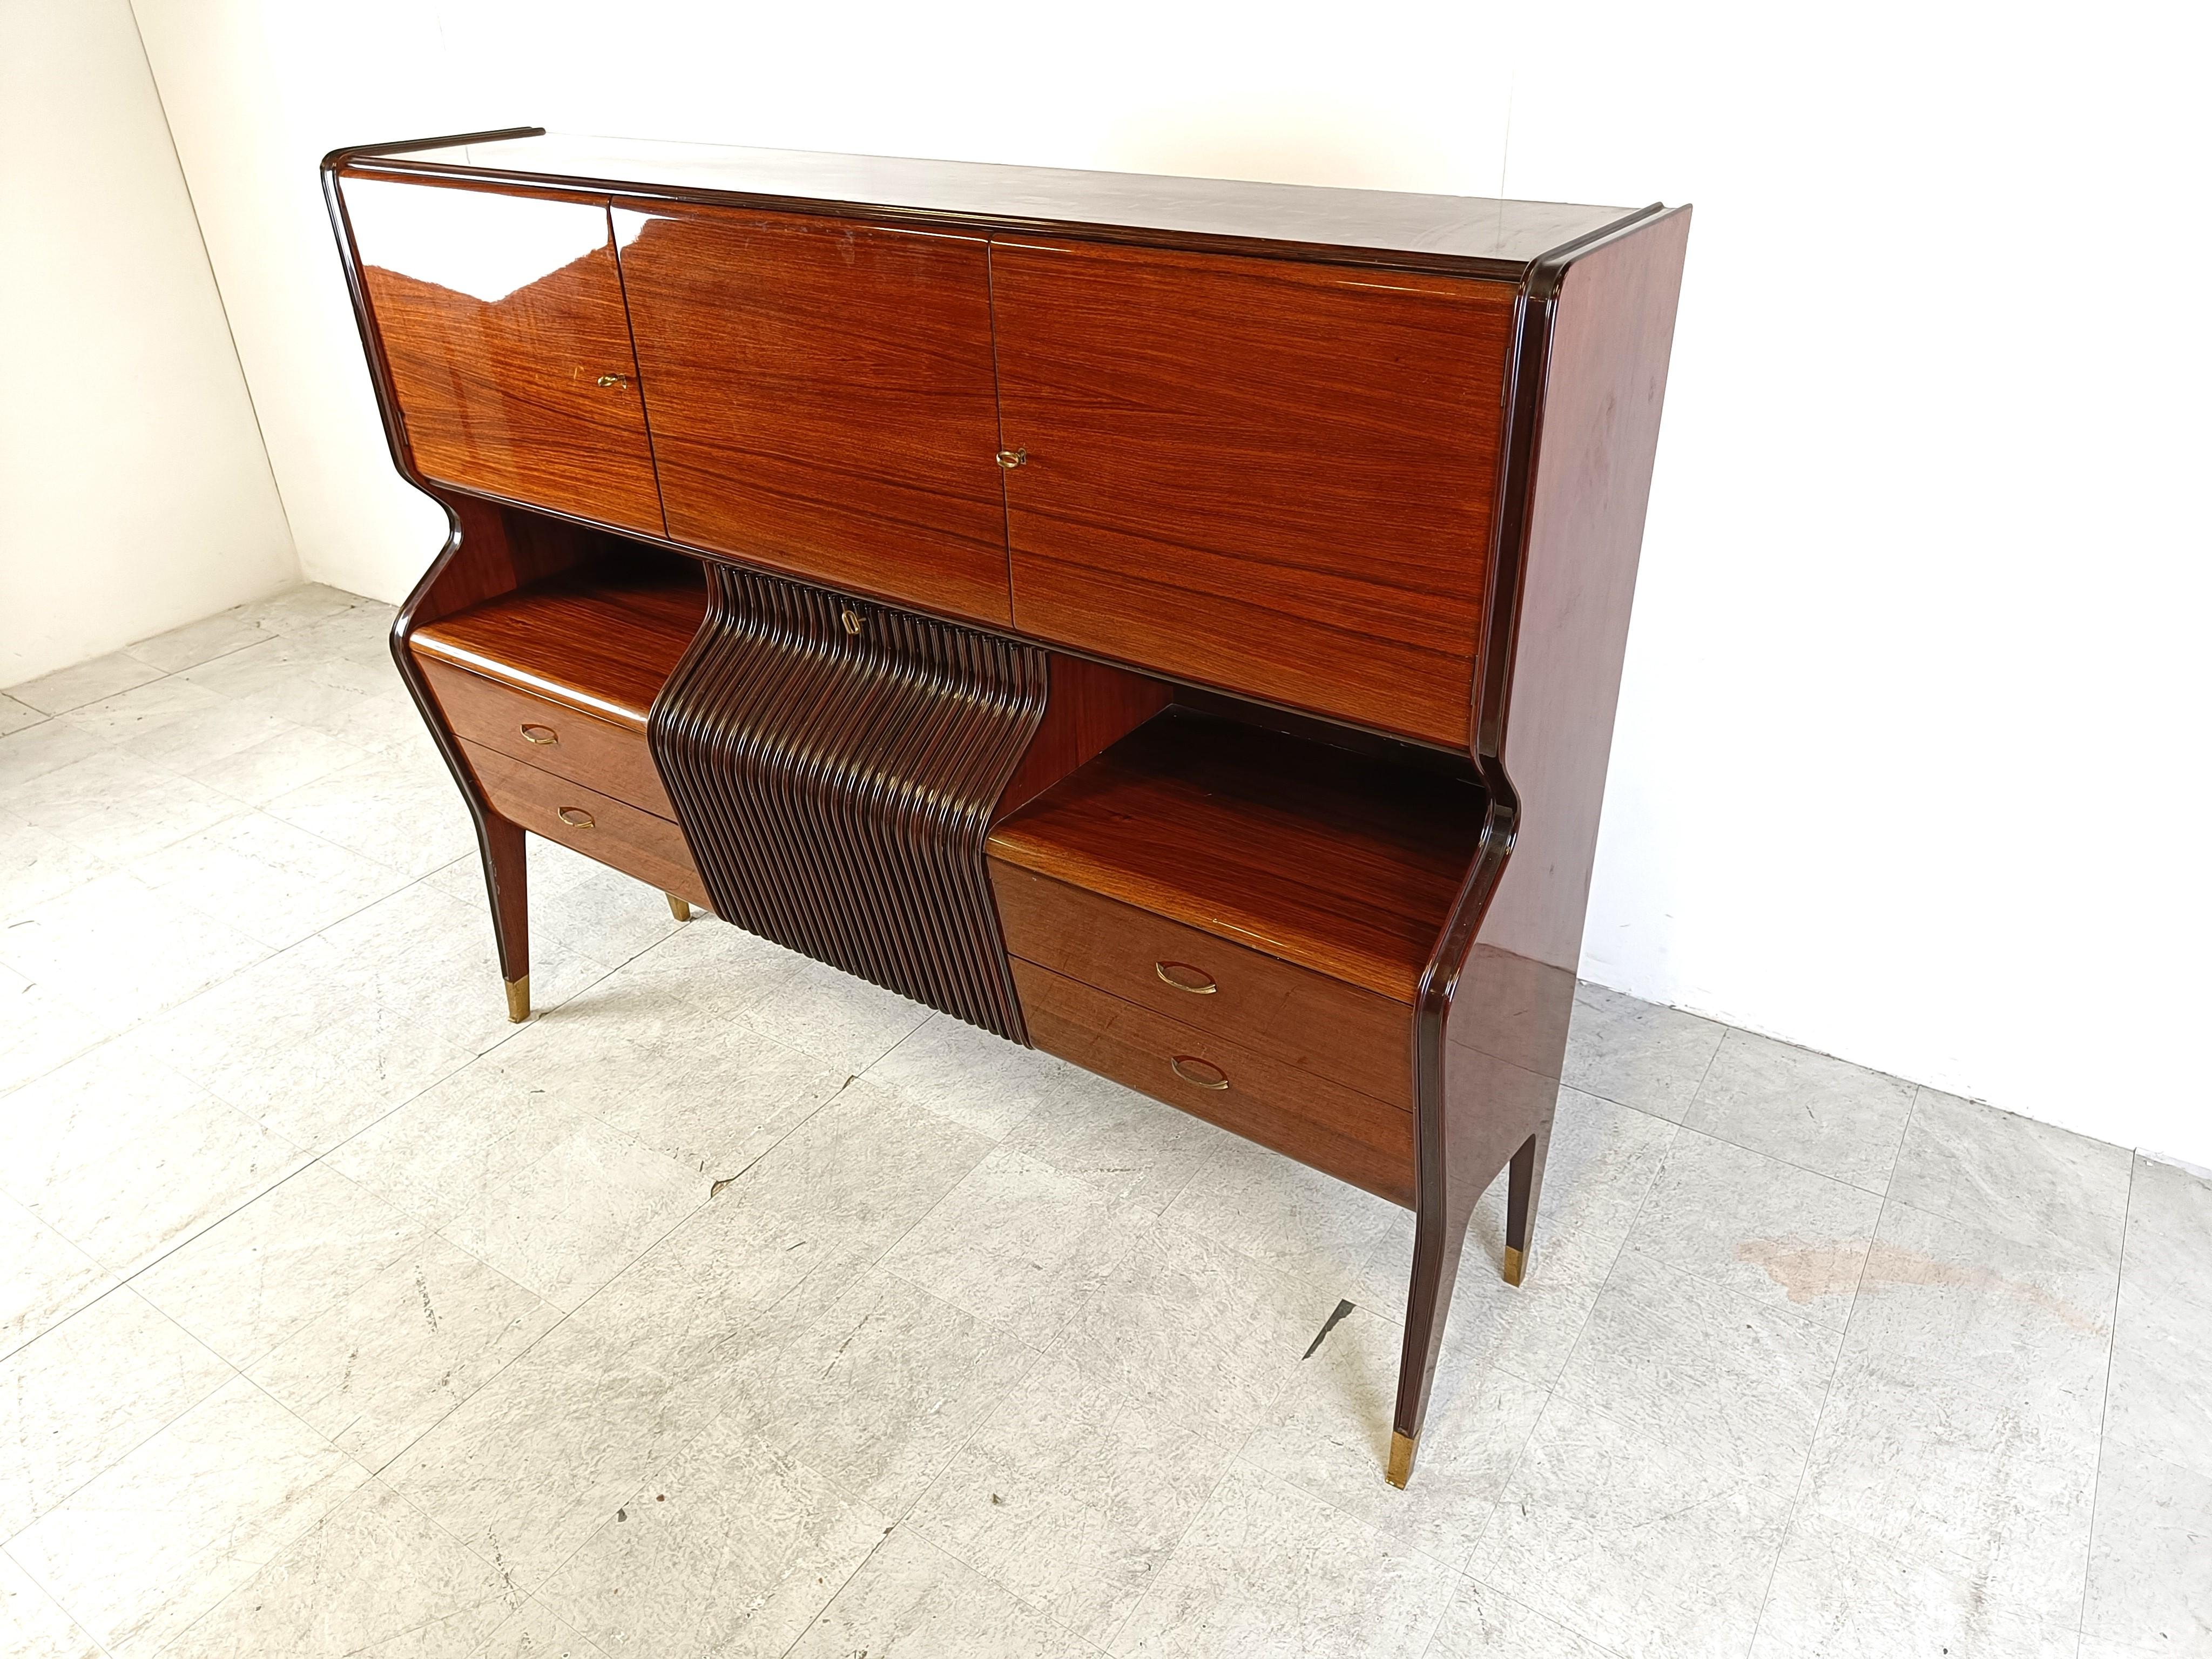 Exquisite bar cabinet designed by Osvaldo Borsani for Atelier Borsani Varedo.

This very elegant mid century italian bar cabinet is made of high quality mahogany wood and has brass tips on the legs

This cabinet consists of 4 drawers, a drop down